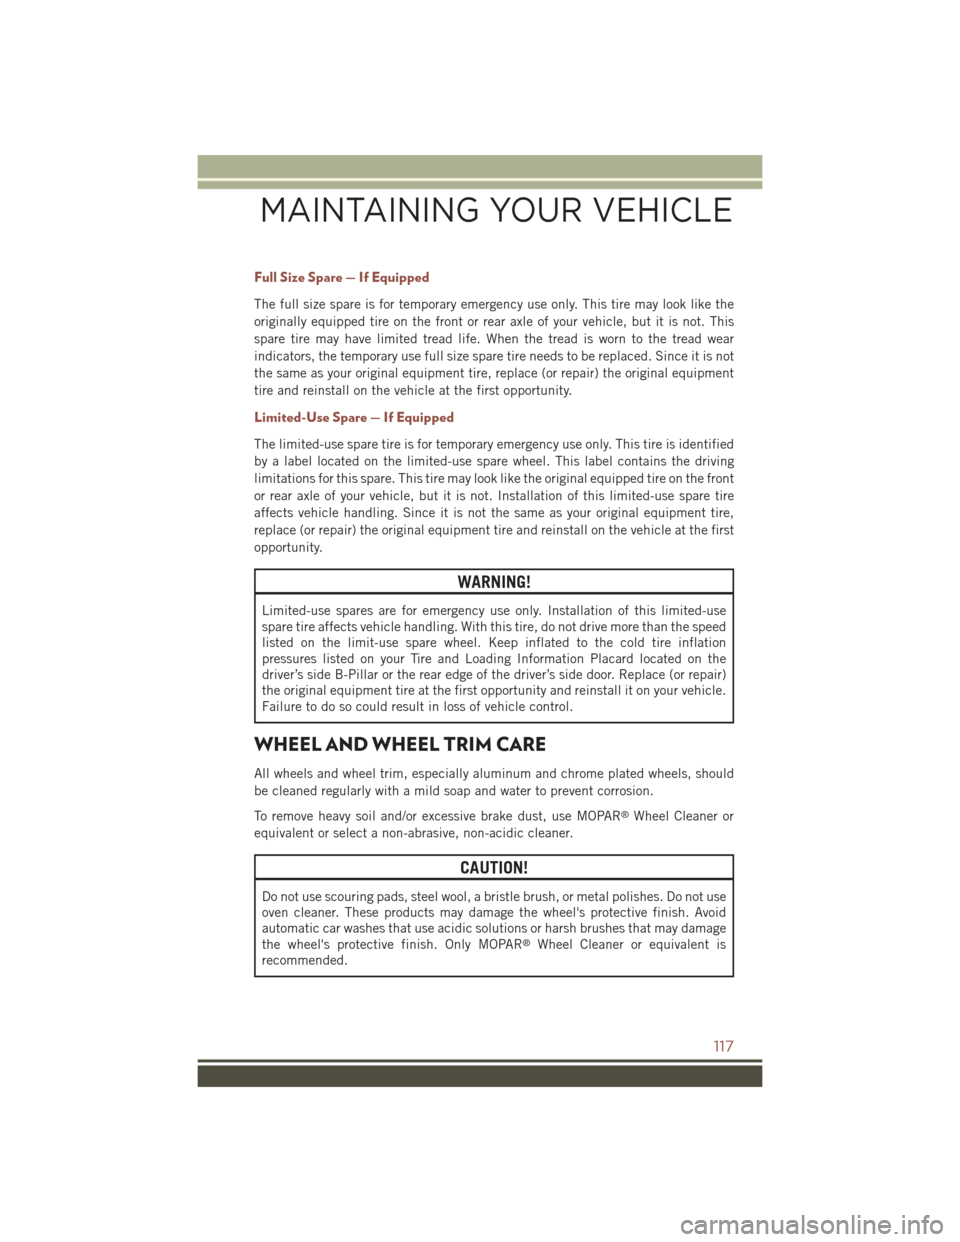 JEEP COMPASS 2015 1.G User Guide Full Size Spare — If Equipped
The full size spare is for temporary emergency use only. This tire may look like the
originally equipped tire on the front or rear axle of your vehicle, but it is not. 